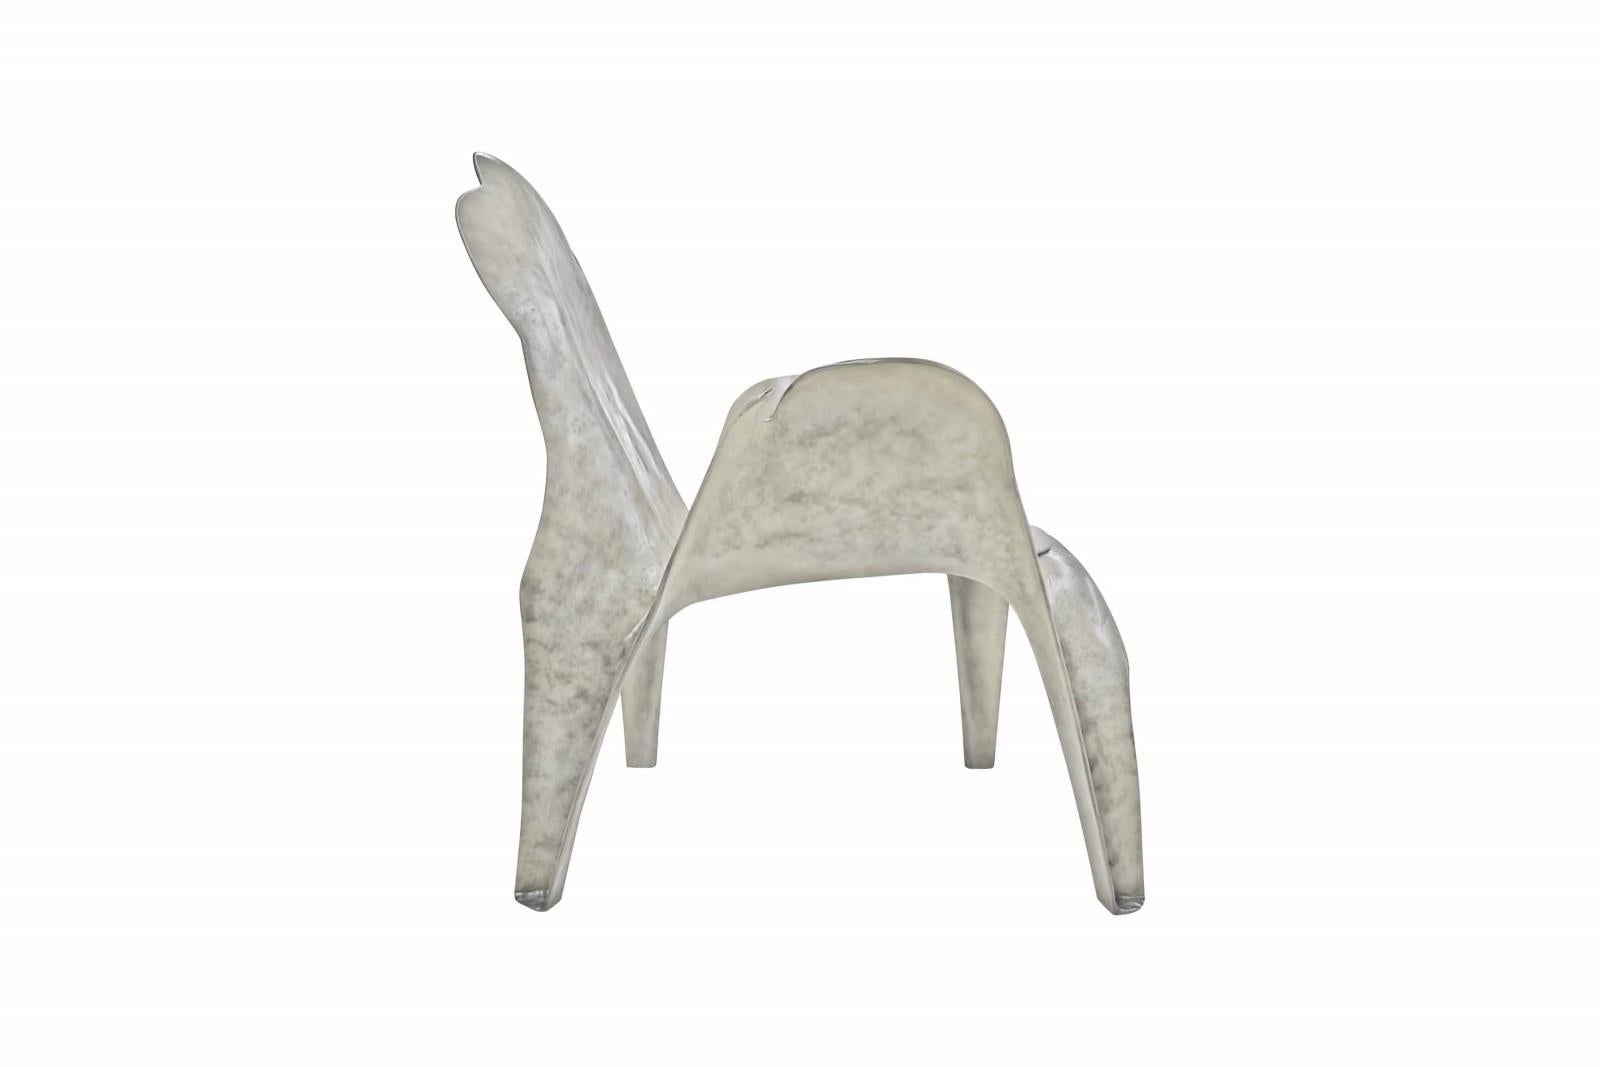 Portuguese Contemporary Sculptural Dining Chairs in Metallic Finish For Sale